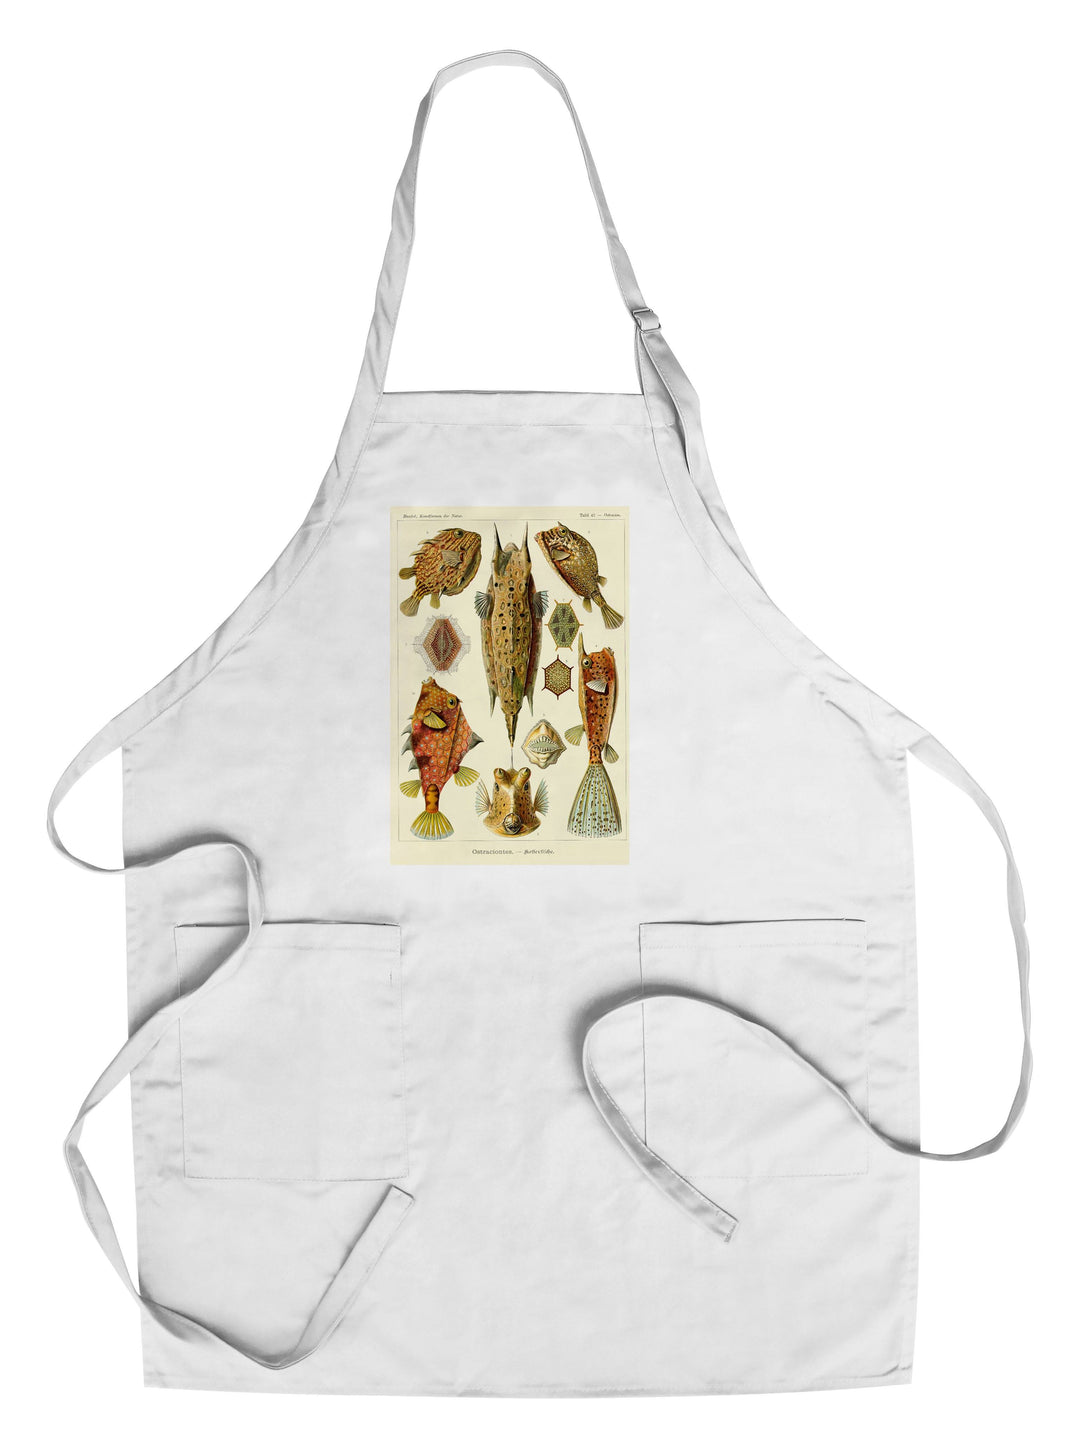 Art Forms of Nature, Ostraciontes (Boxfish), Ernst Haeckel Artwork, Towels and Aprons Kitchen Lantern Press Chef's Apron 